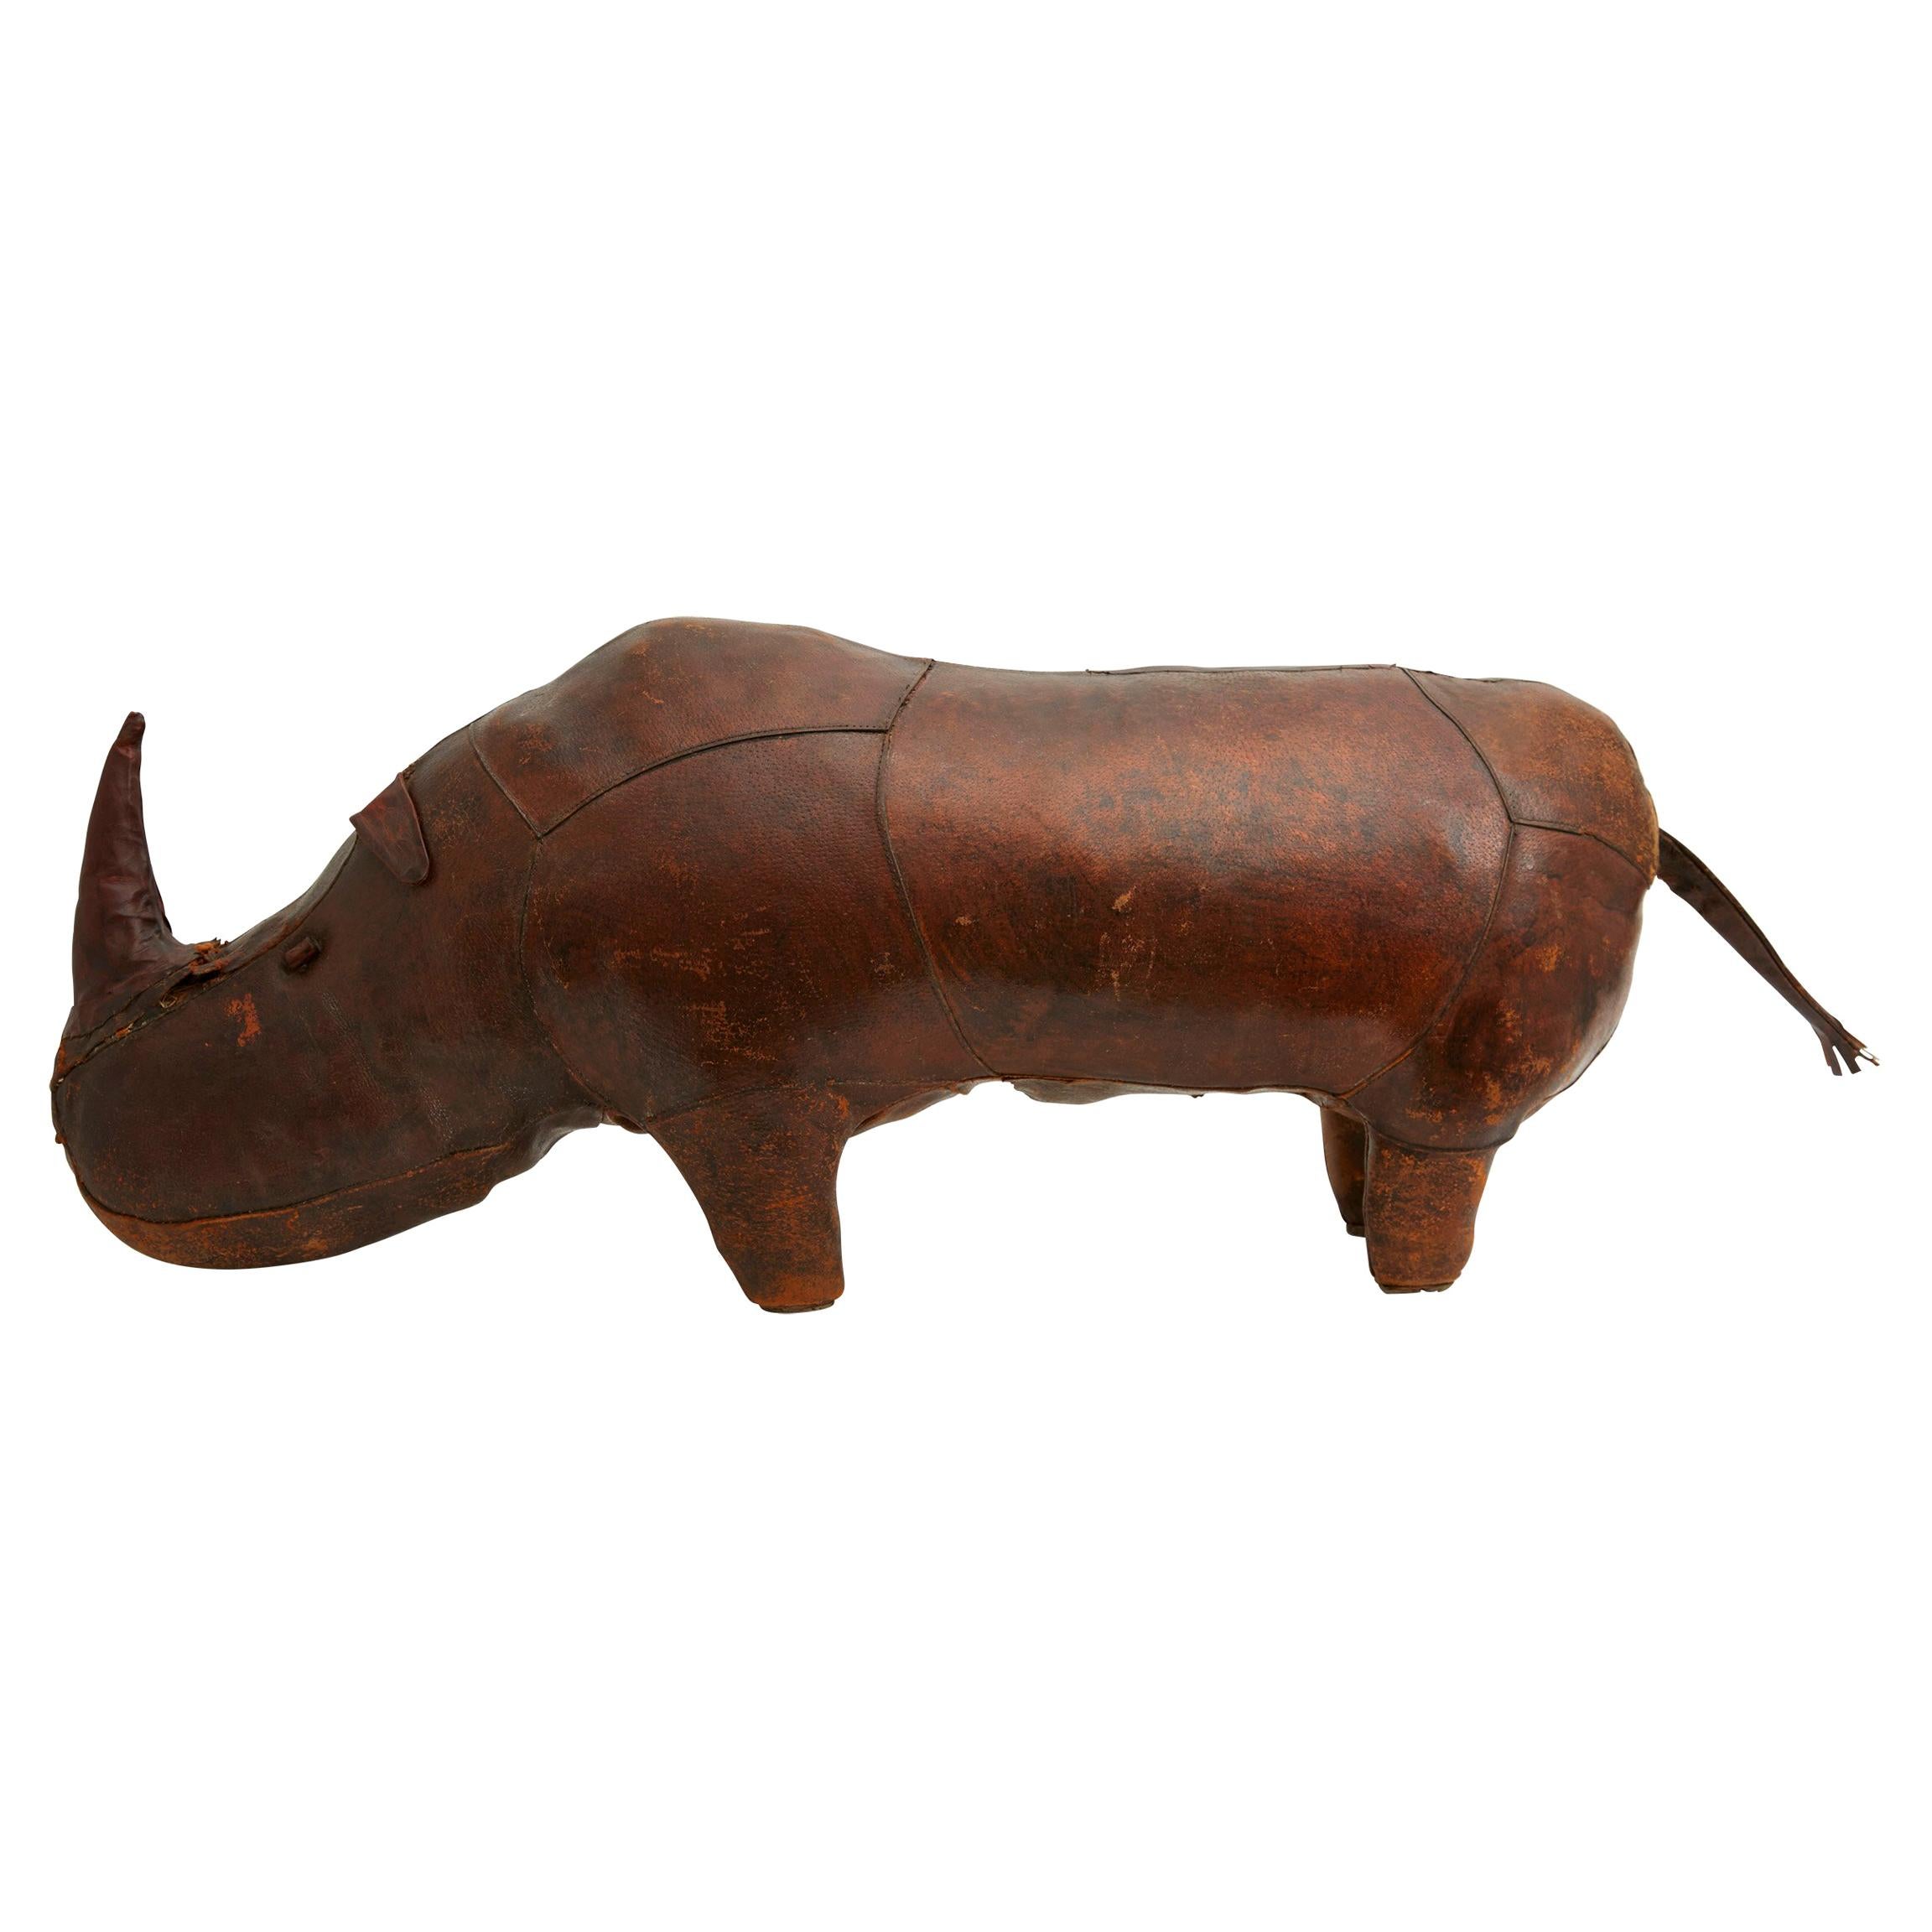 Abercrombie & Fitch Leather Rhino Footstool Designed by Dimitri Omersa